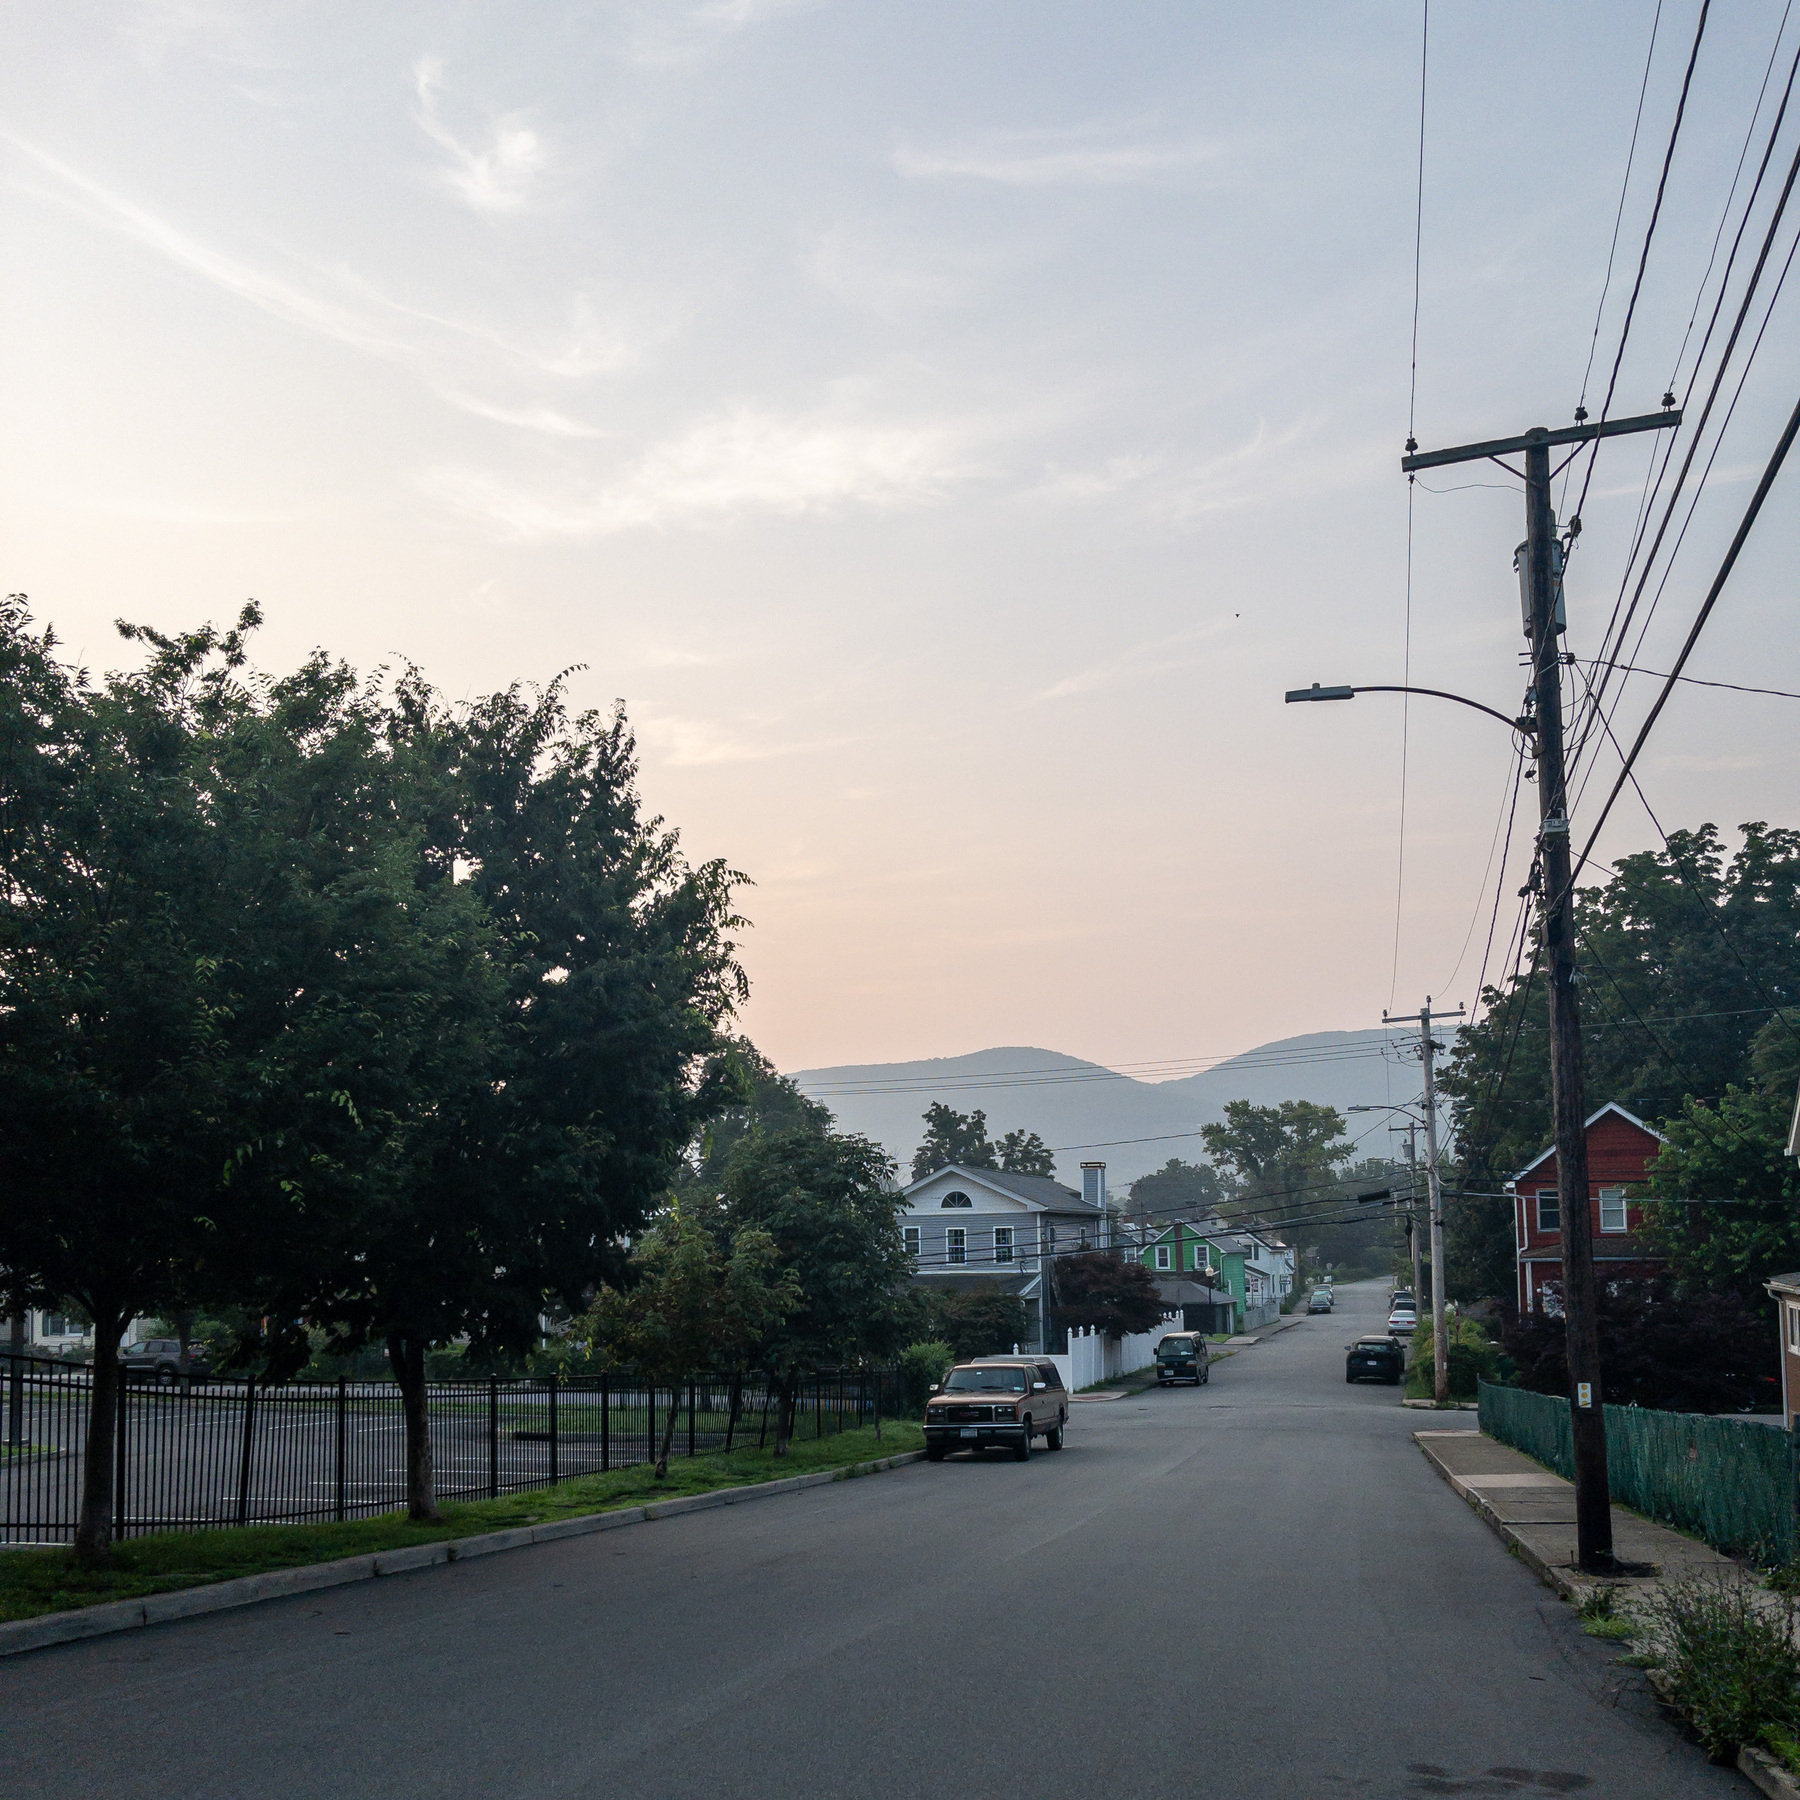 View down a street in the early morning with trees on the left and utility pole and wires on the right side and the hazy outline of rounded mountains in the distance.